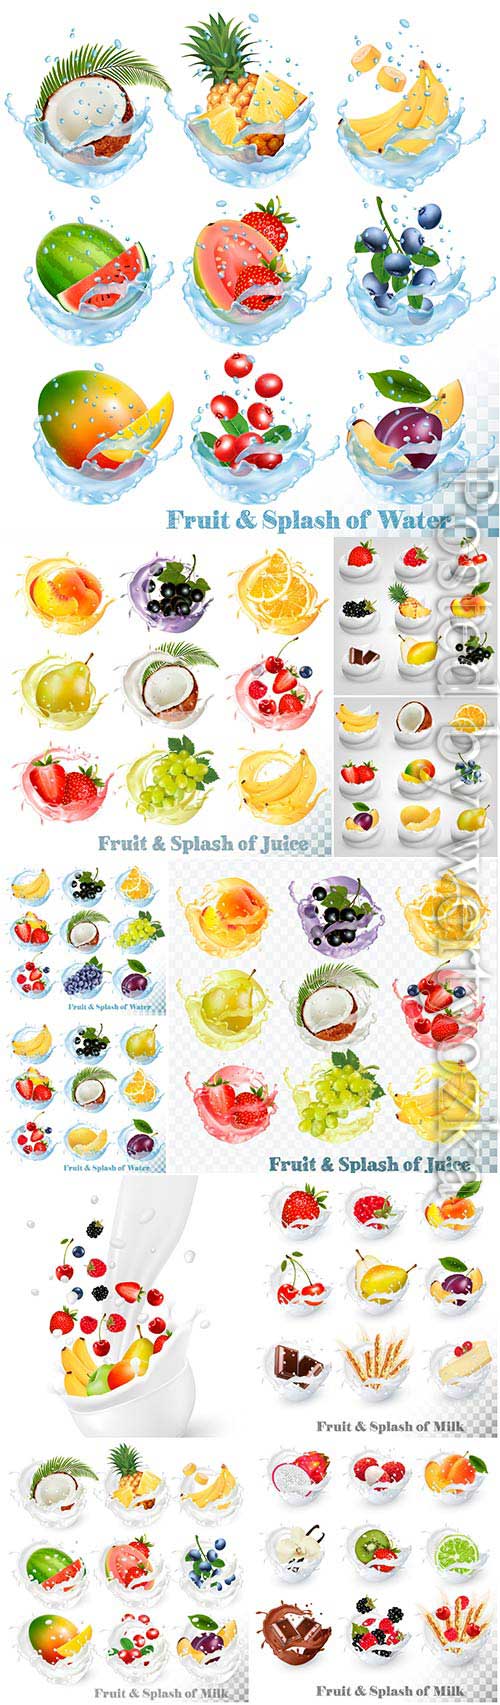 Fruits and berries in water and milk in vector